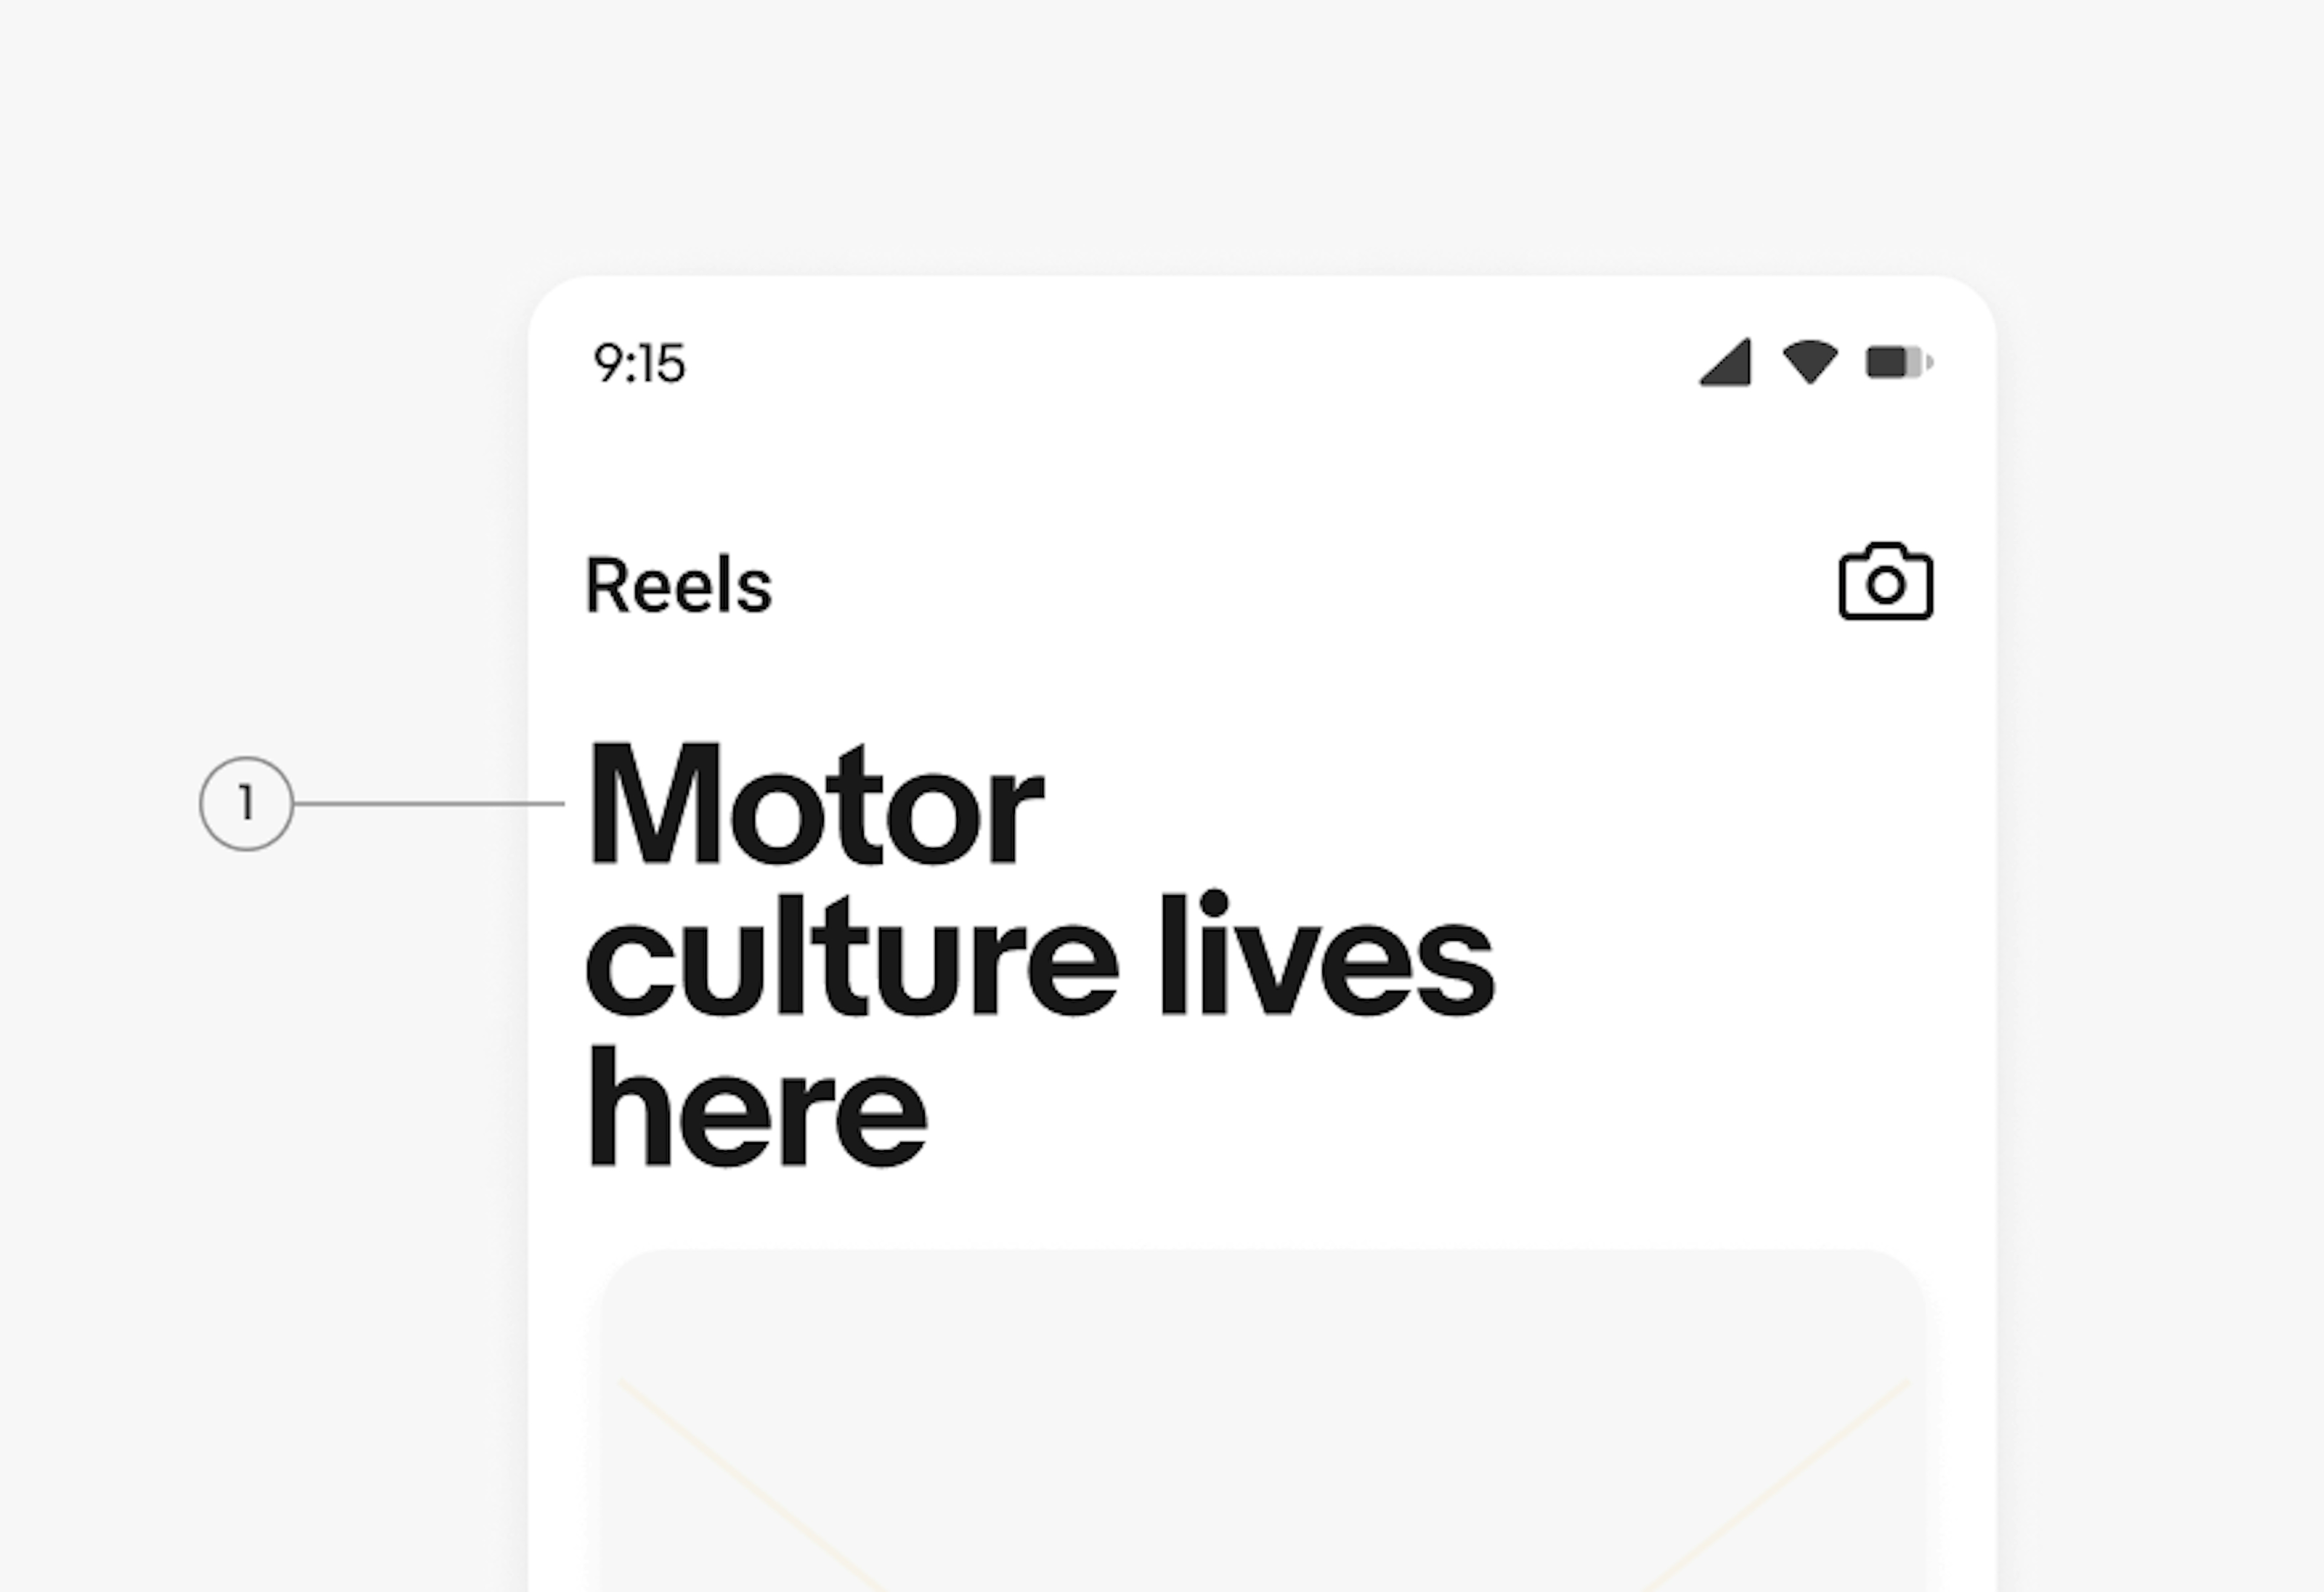 The headline “Motor culture lives here” highlighted with the number 1. 